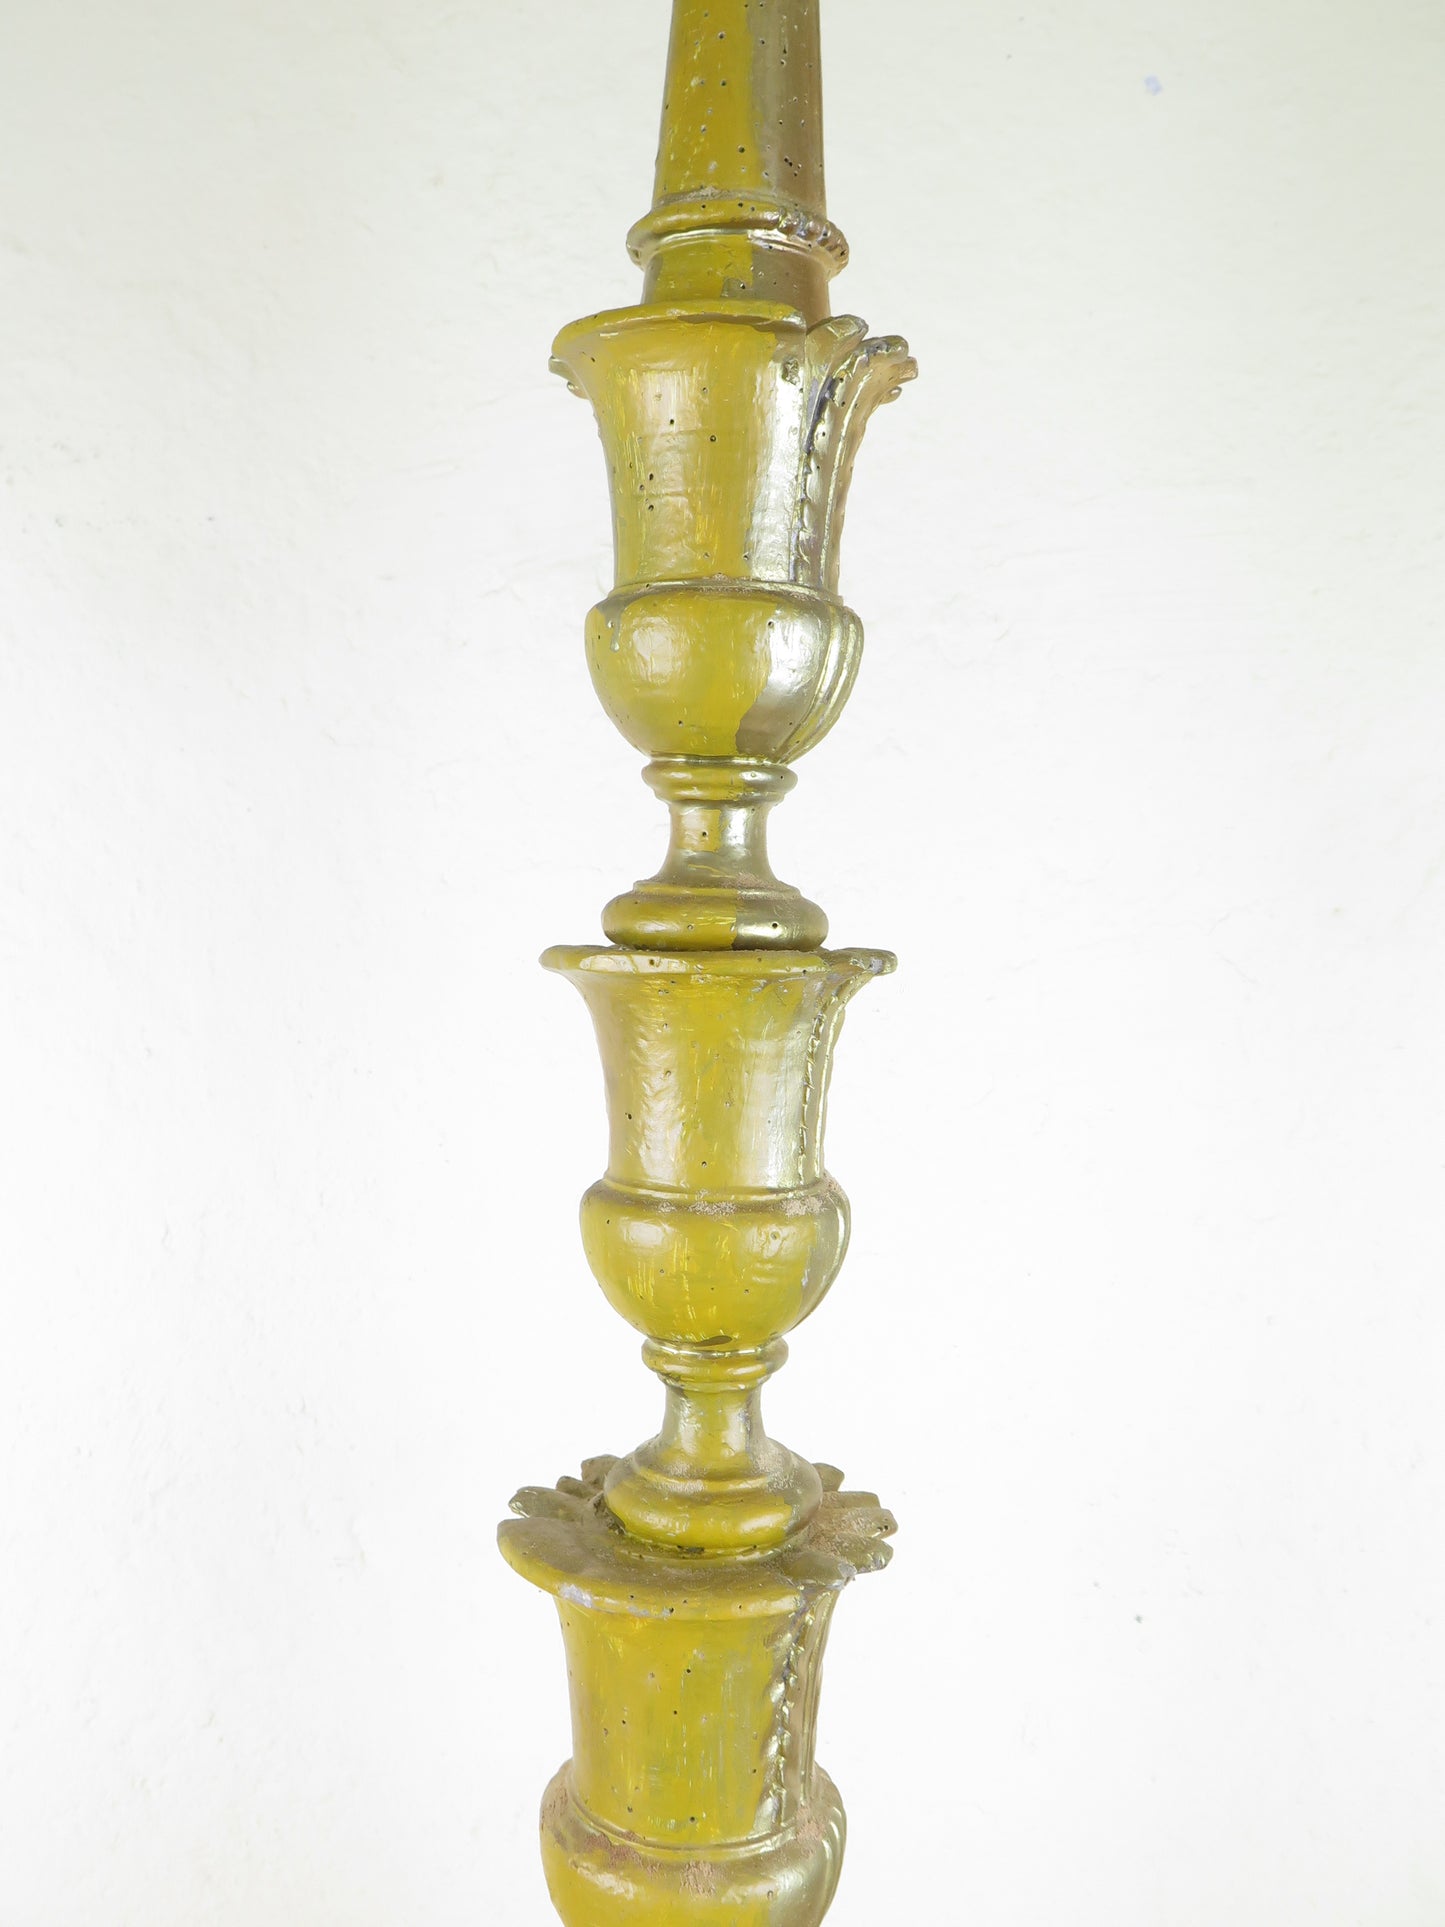 LARGE ANCIENT GOLDEN TORCH CANDLESTICK IN CARVED WOOD BAROQUE Xb